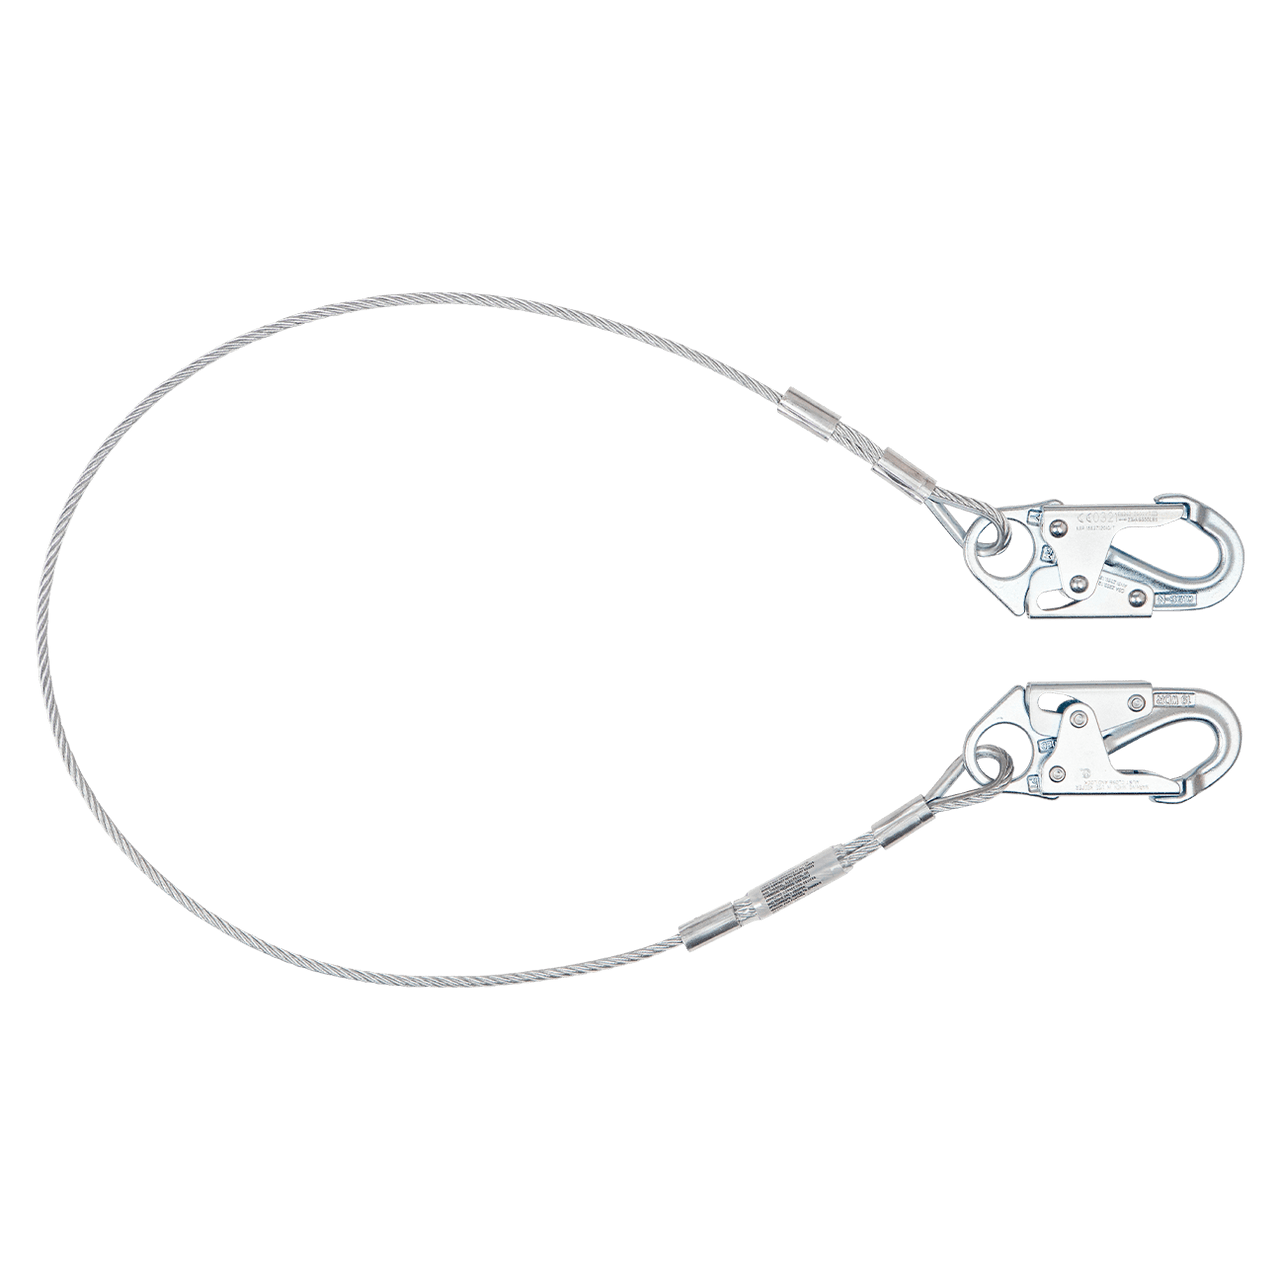 FallTech Fixed-Length Cable Restraint Lanyard with Steel Snap Hooks from Columbia Safety